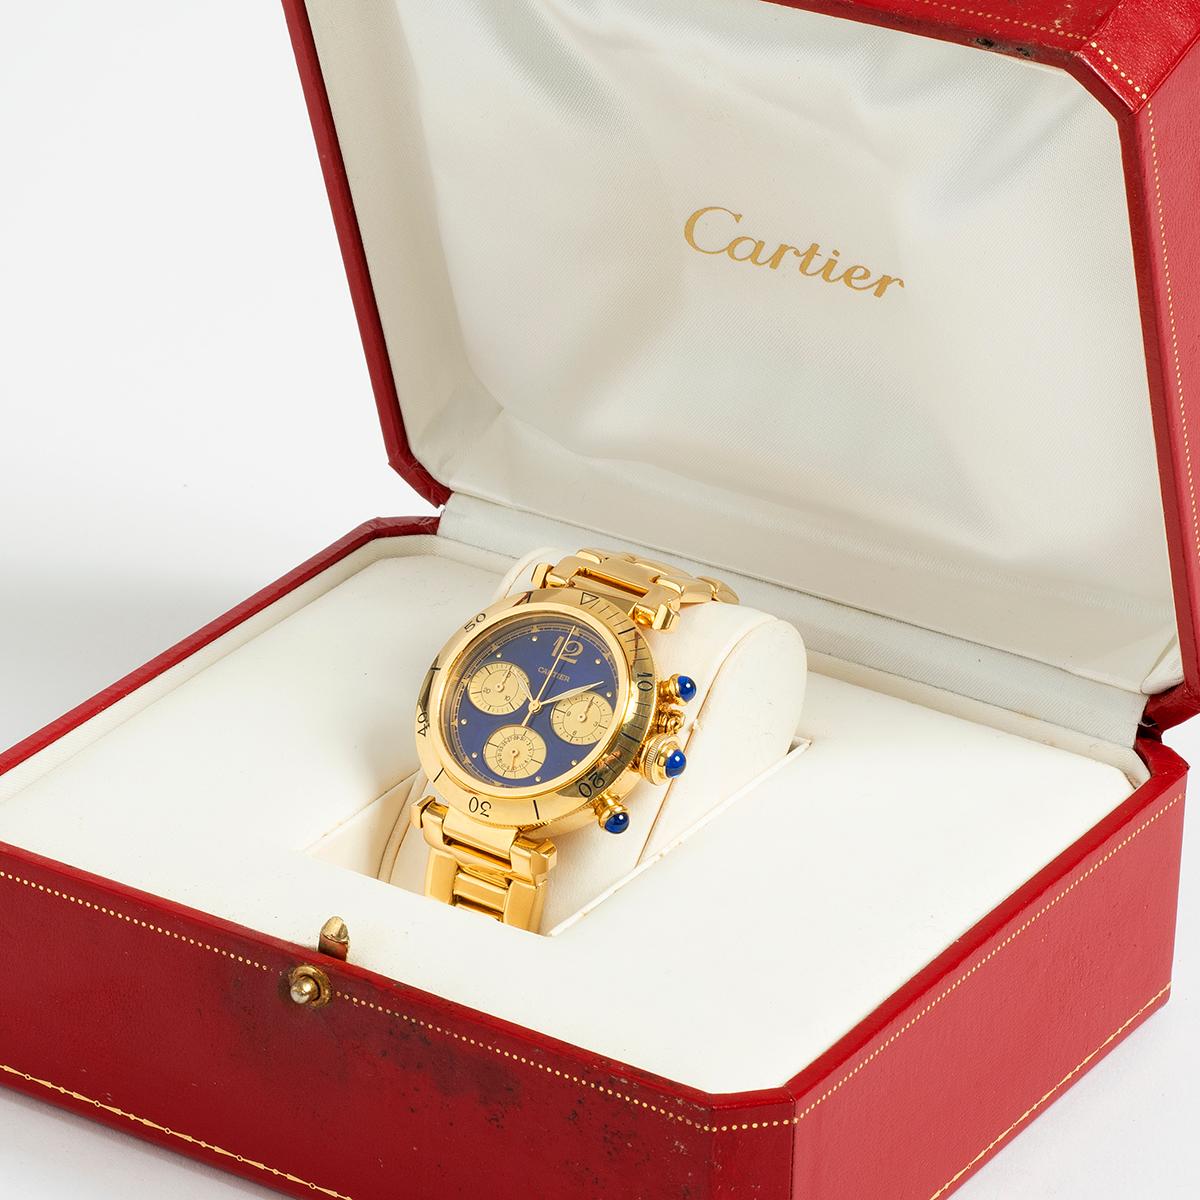 Our extremely rare Cartier Pasha chronograph quartz with date and rotating bezel, features an 18k yellow gold case and 18k yellow gold bracelet (featuring a safety clasp), with gold/ blue dial. A prominent and iconic 1980s/ 1990s Cartier design,